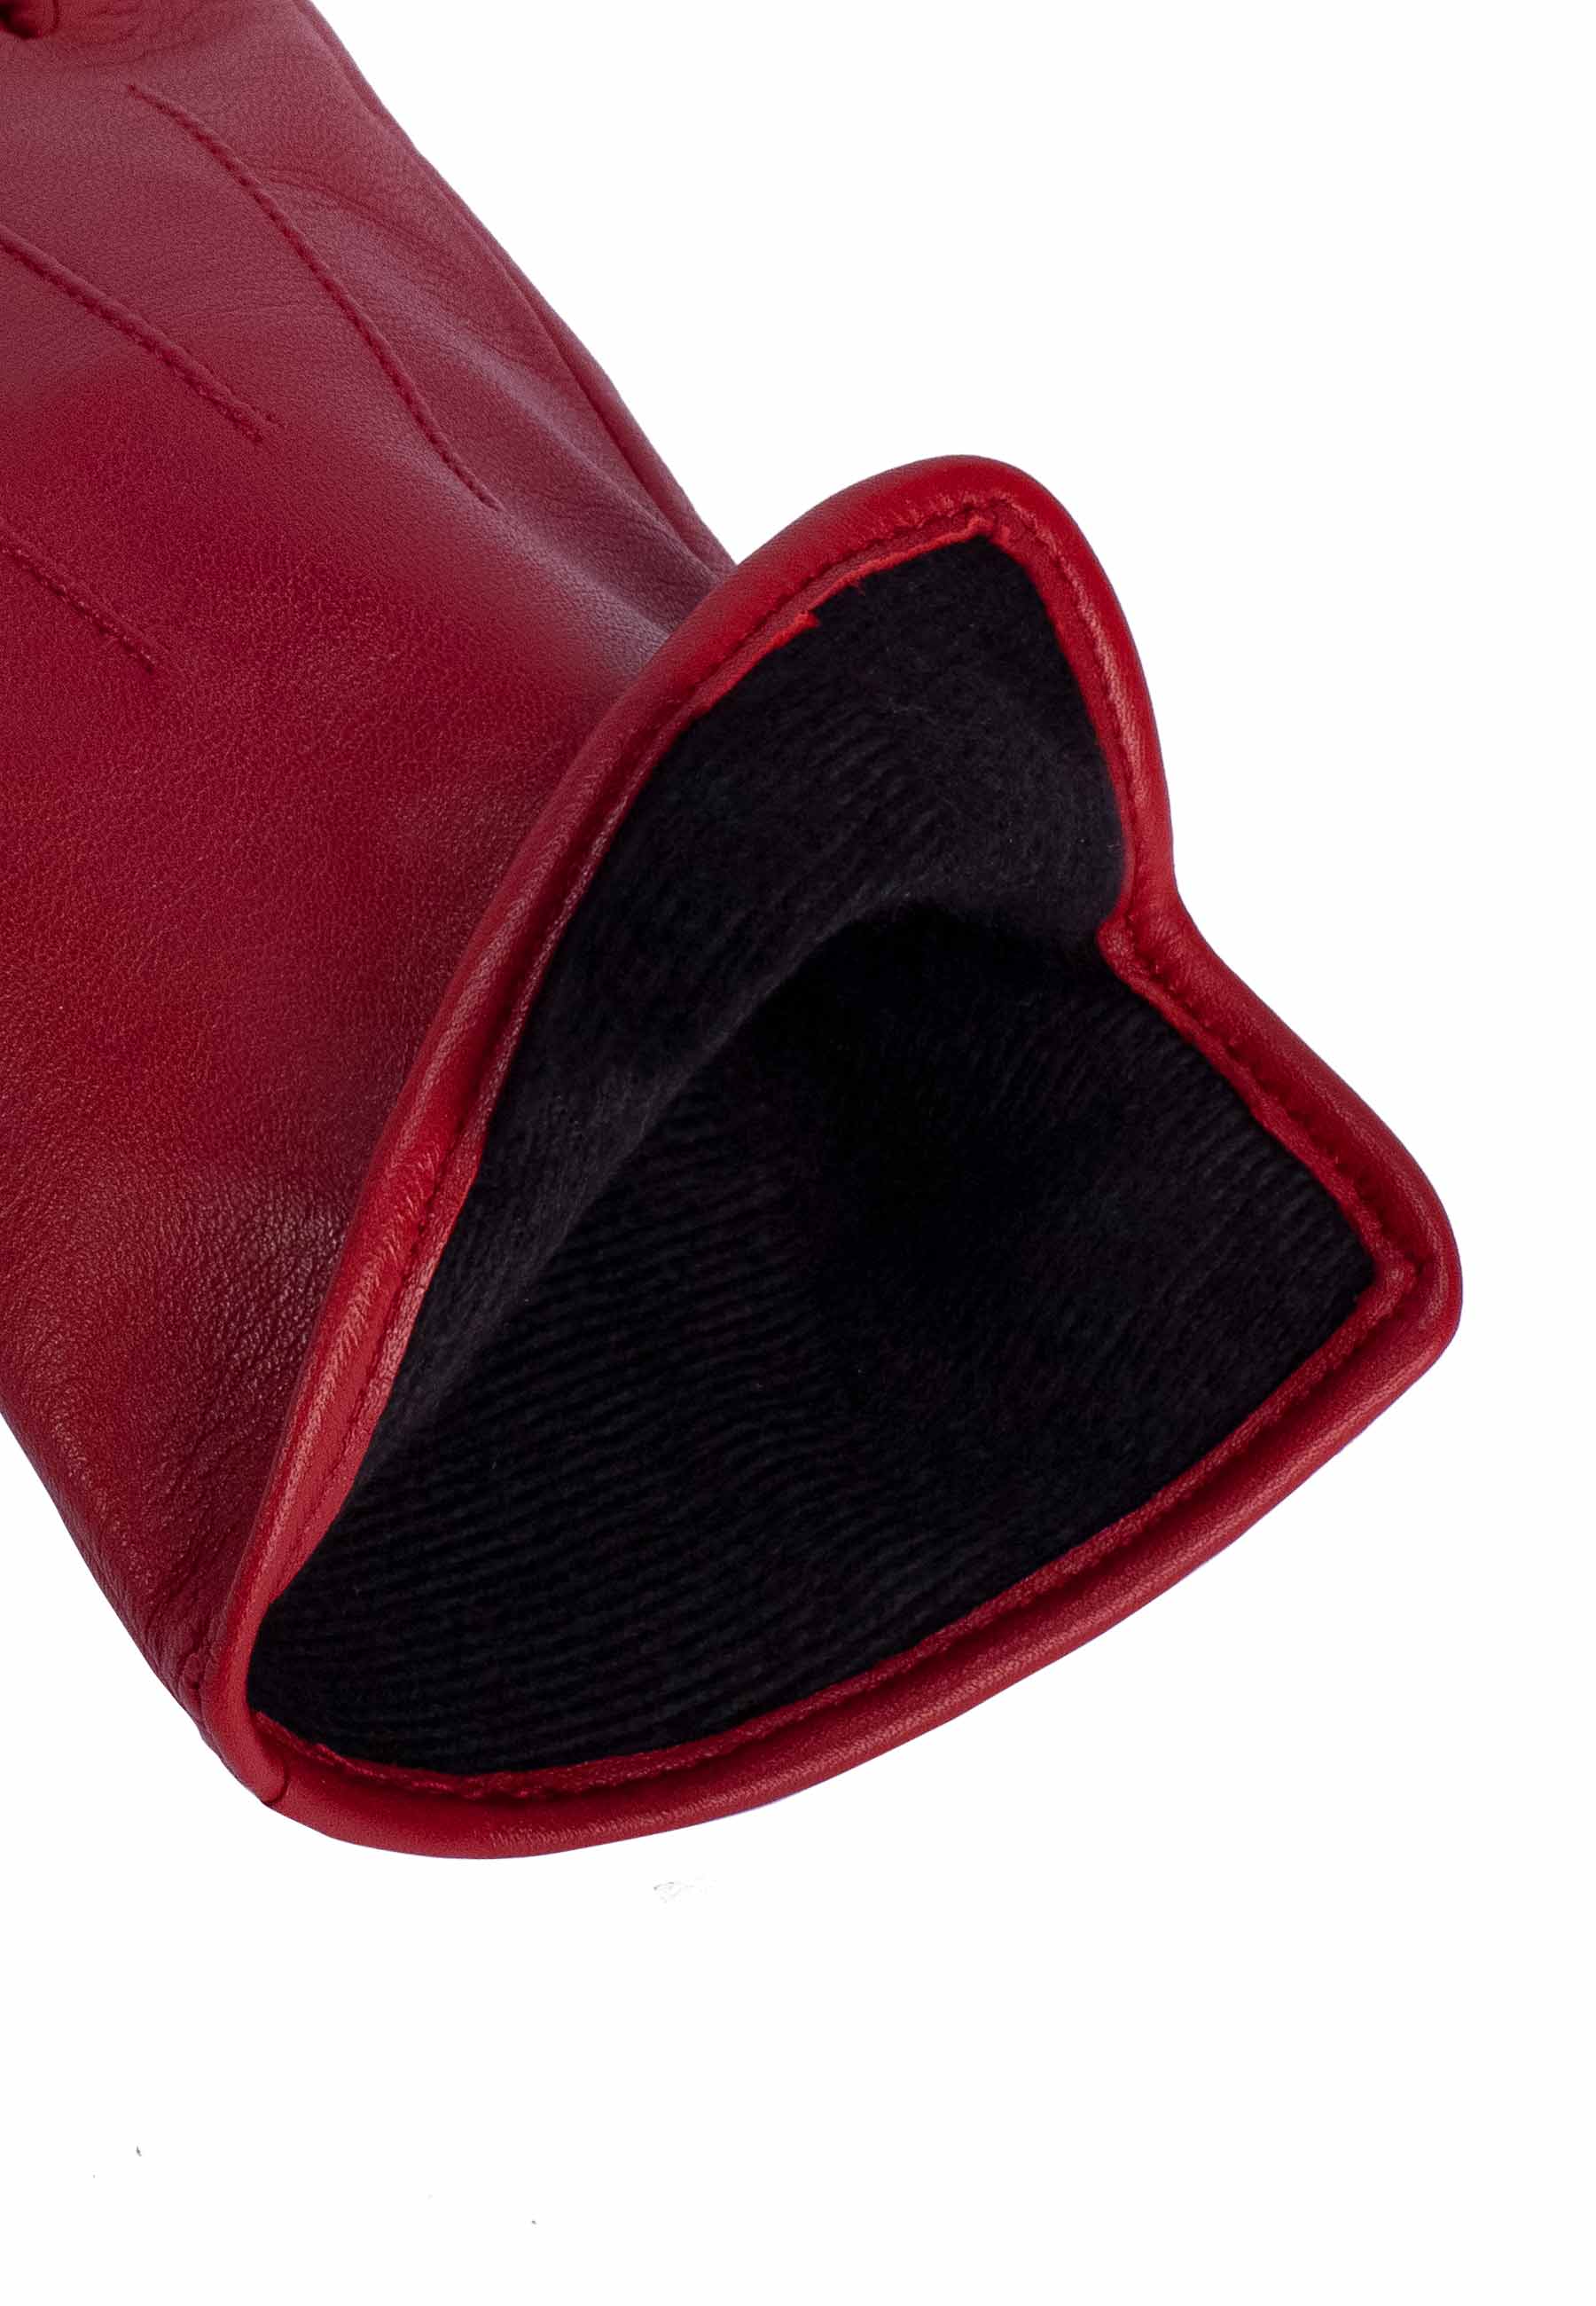 Gloves 'Carla' red